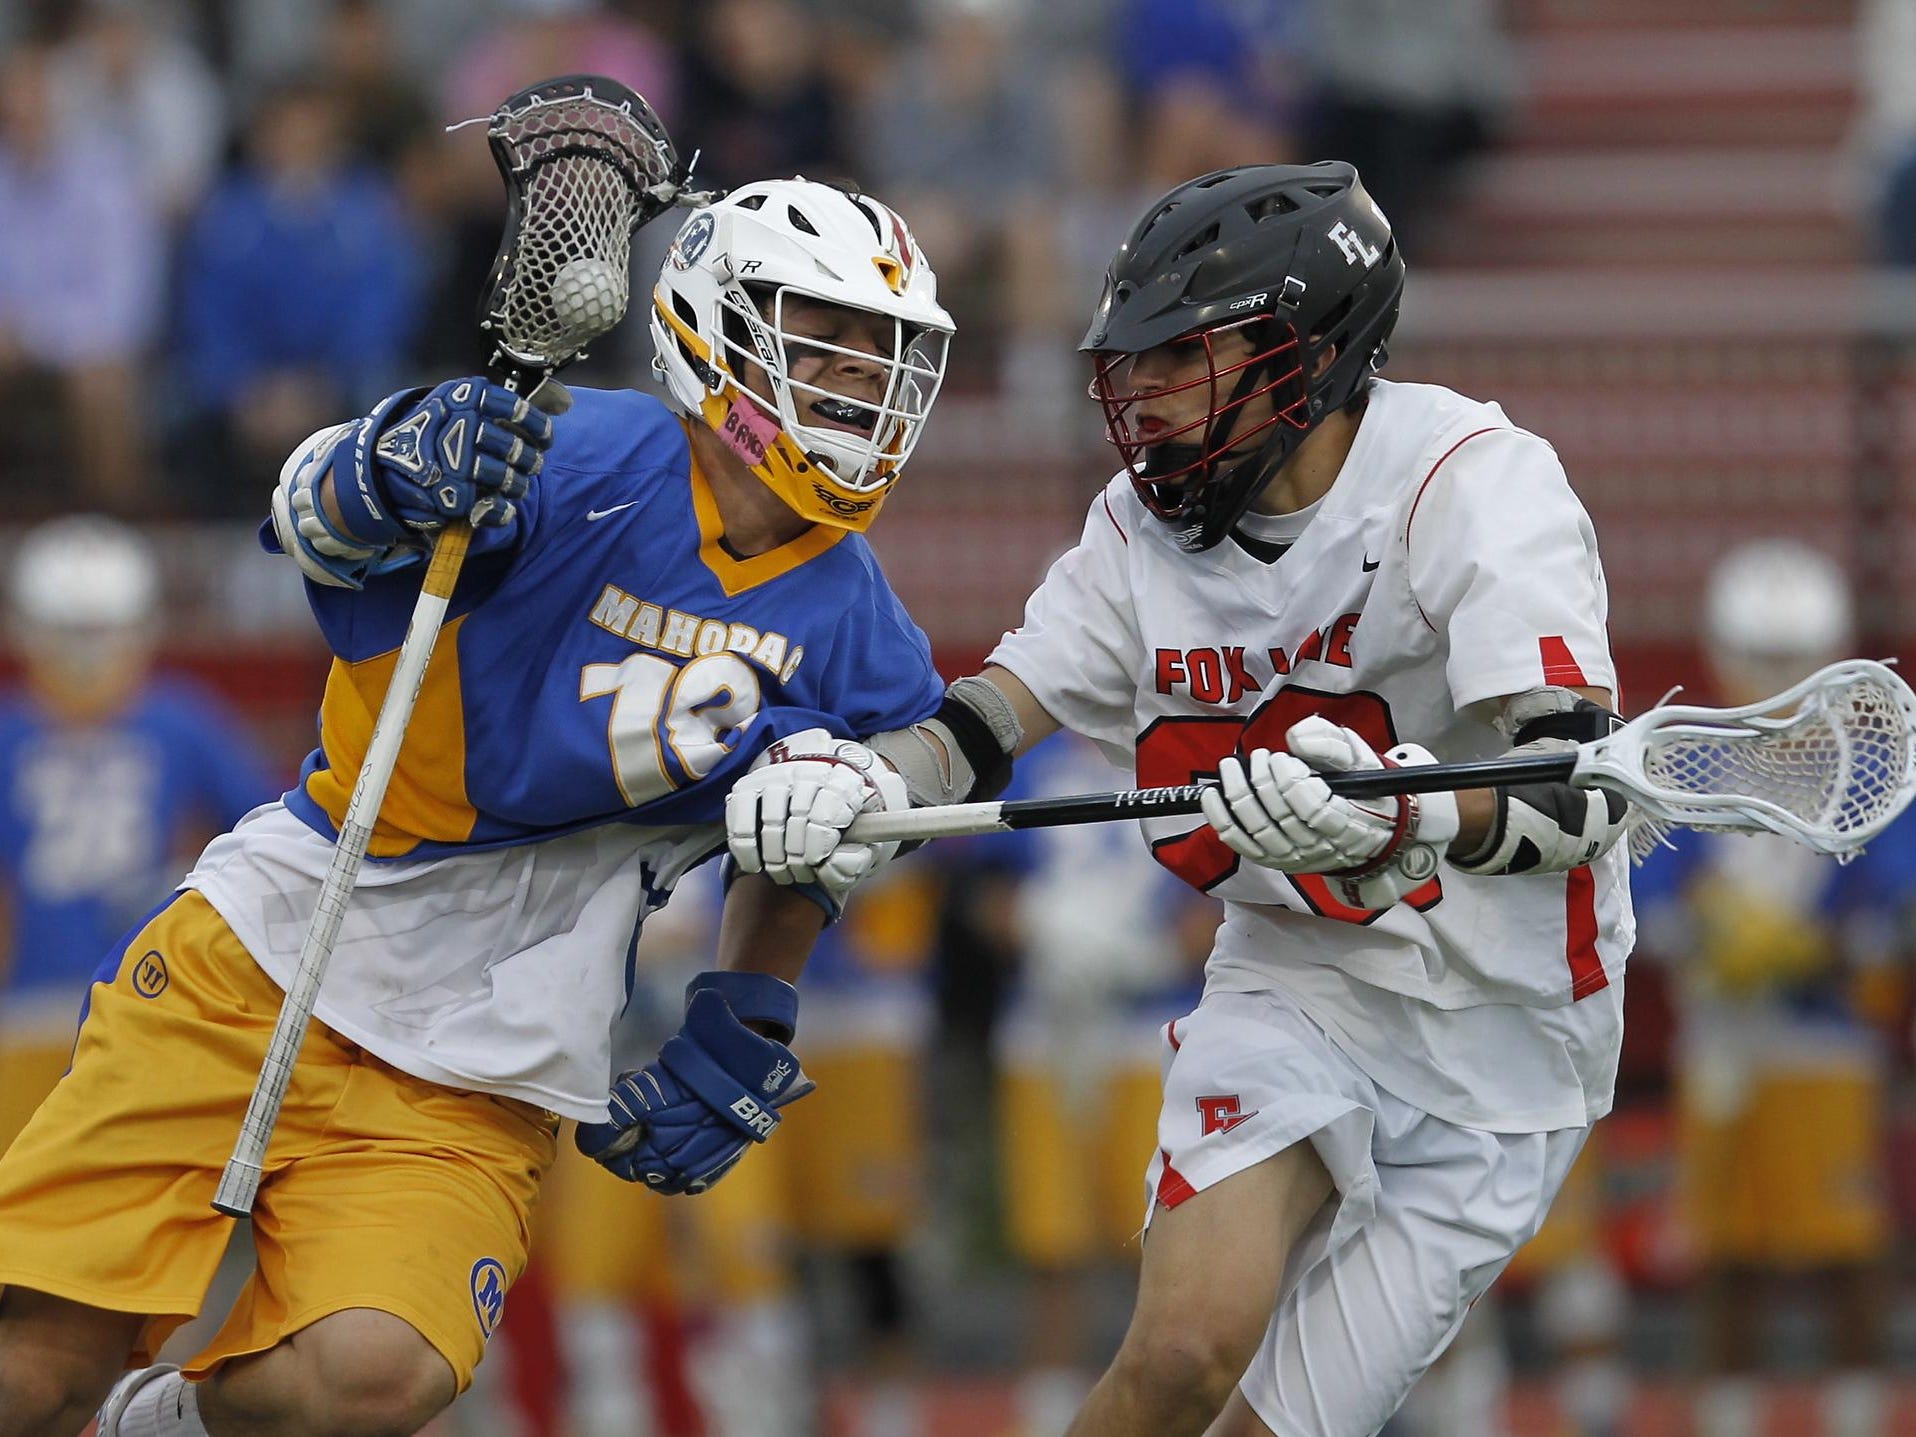 Mahopac’s Andrew Evans works against Fox Lane’s Matt Harrison during a Class A quarterfinal at Fox Lane High School in Bedford on Wednesday.